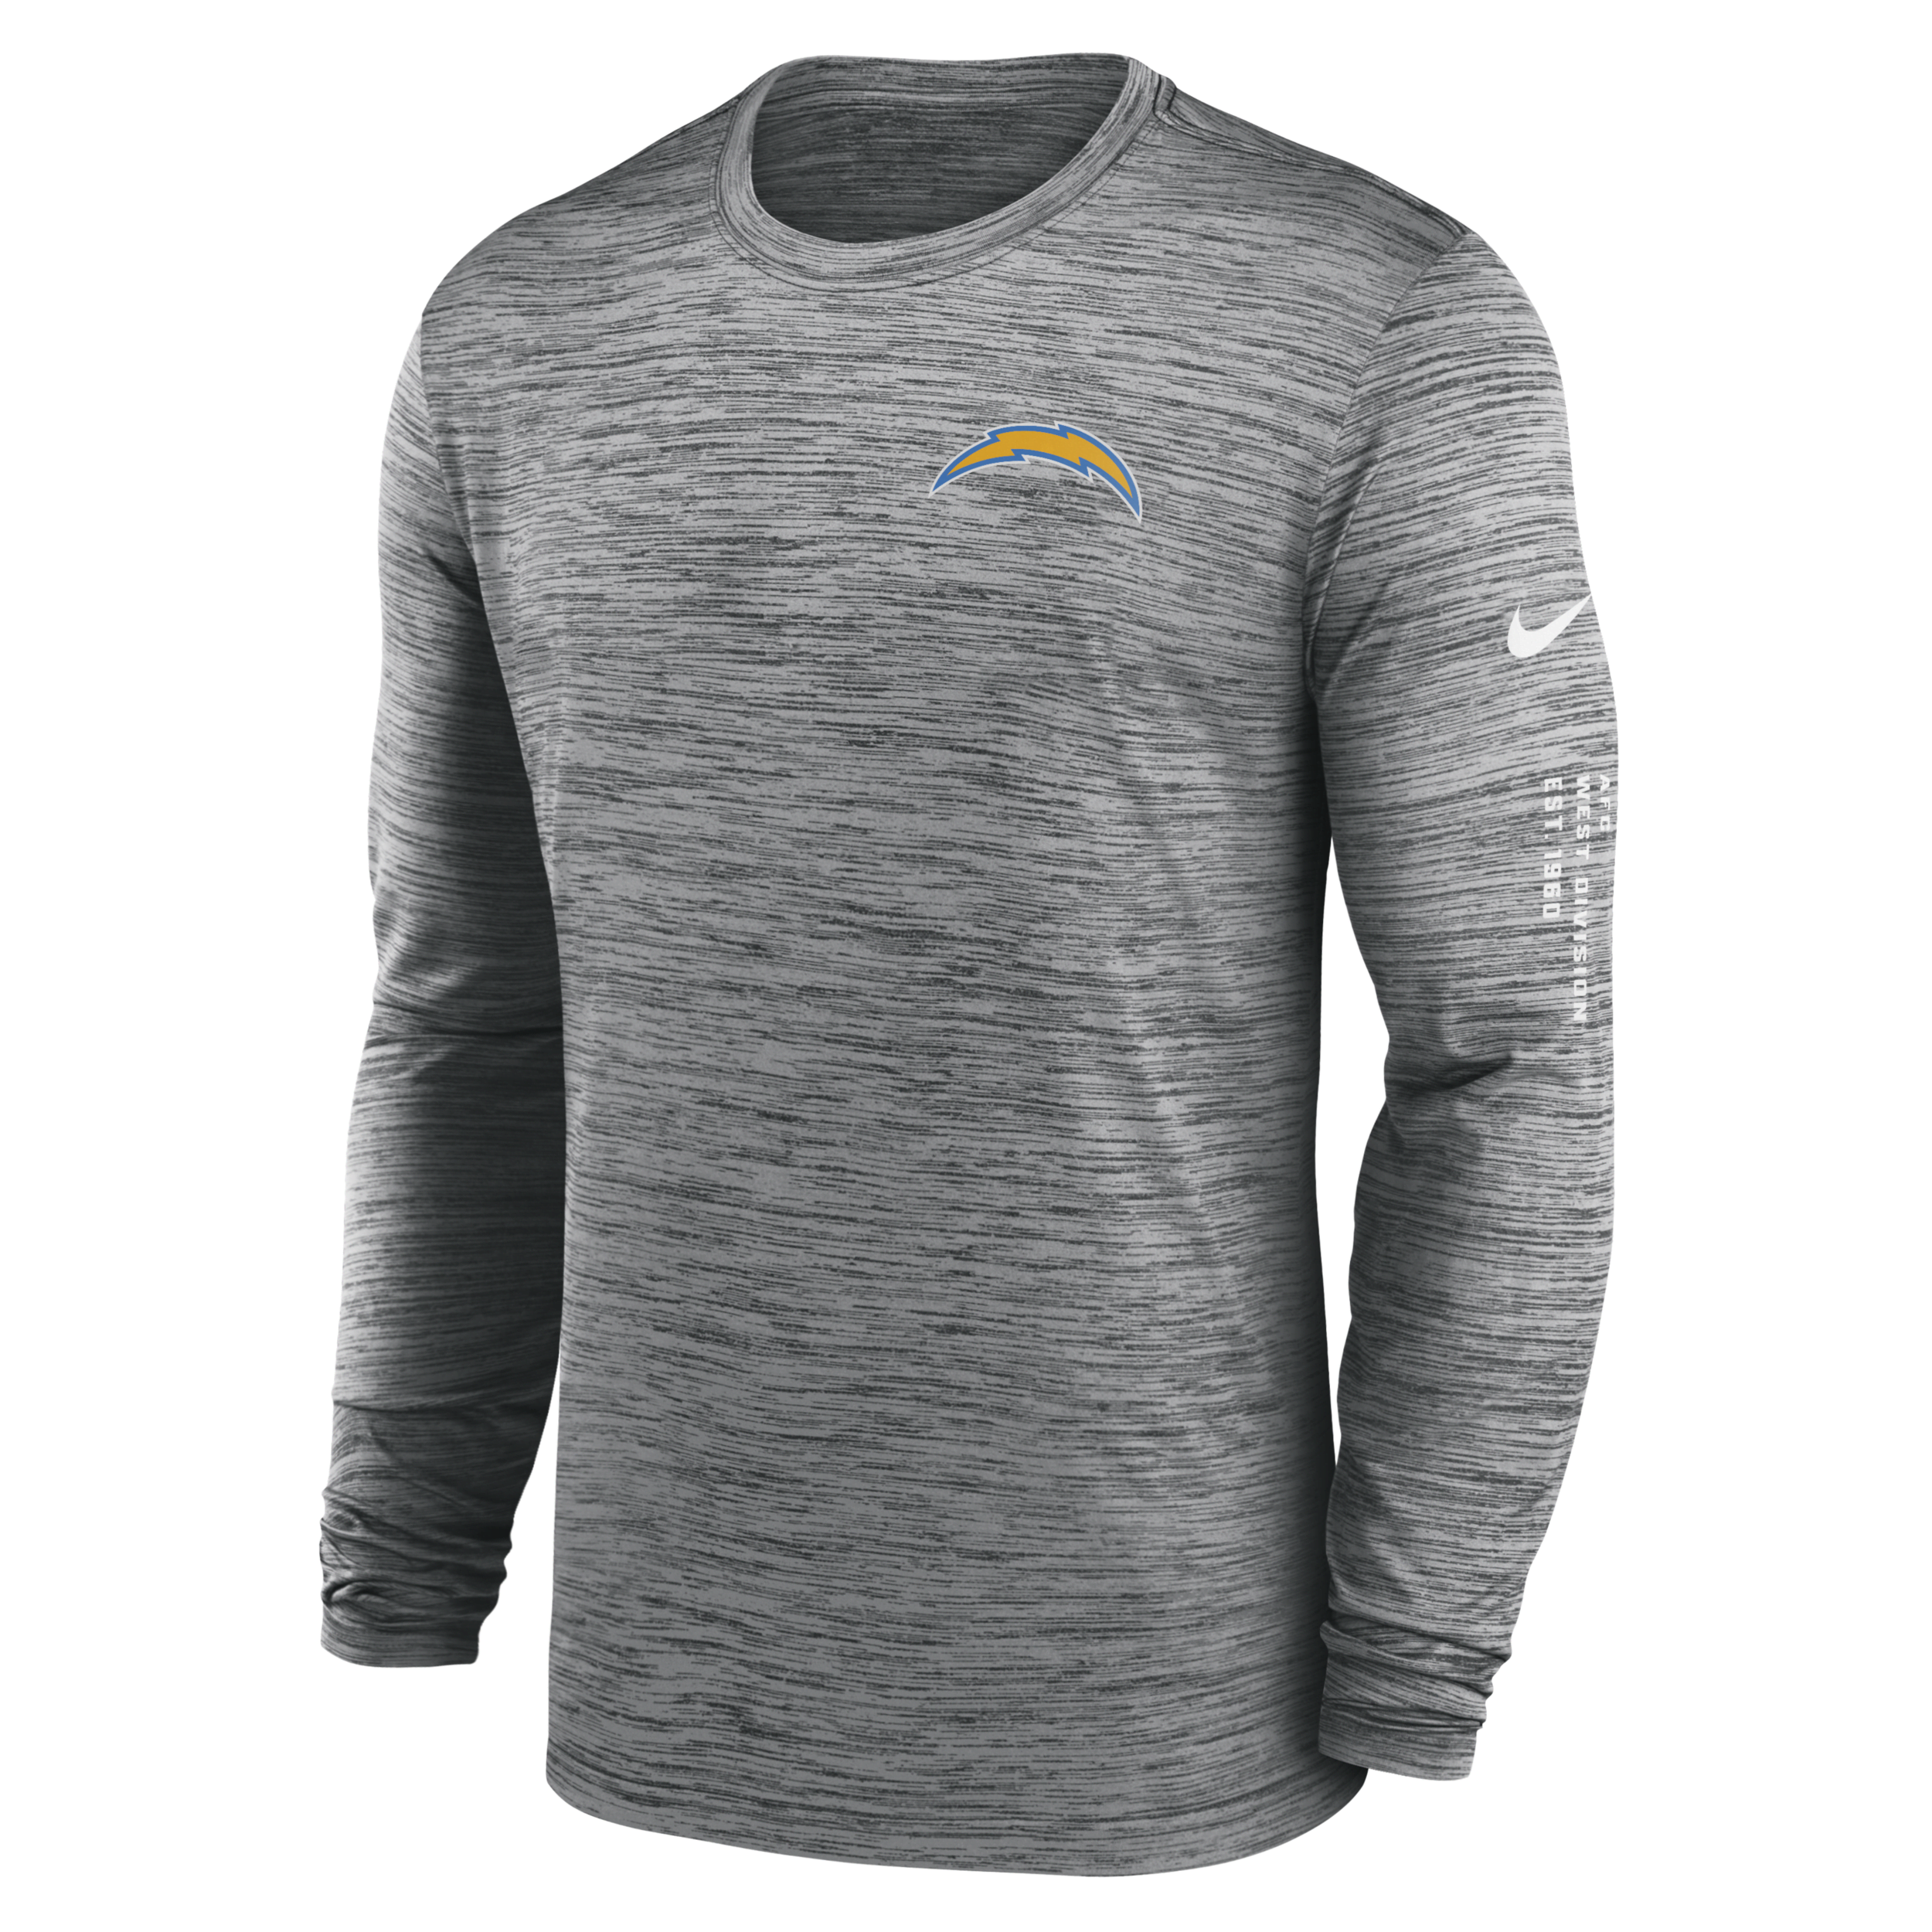 NIKE LOS ANGELES CHARGERS VELOCITY  MEN'S DRI-FIT NFL LONG-SLEEVE T-SHIRT,1014266603